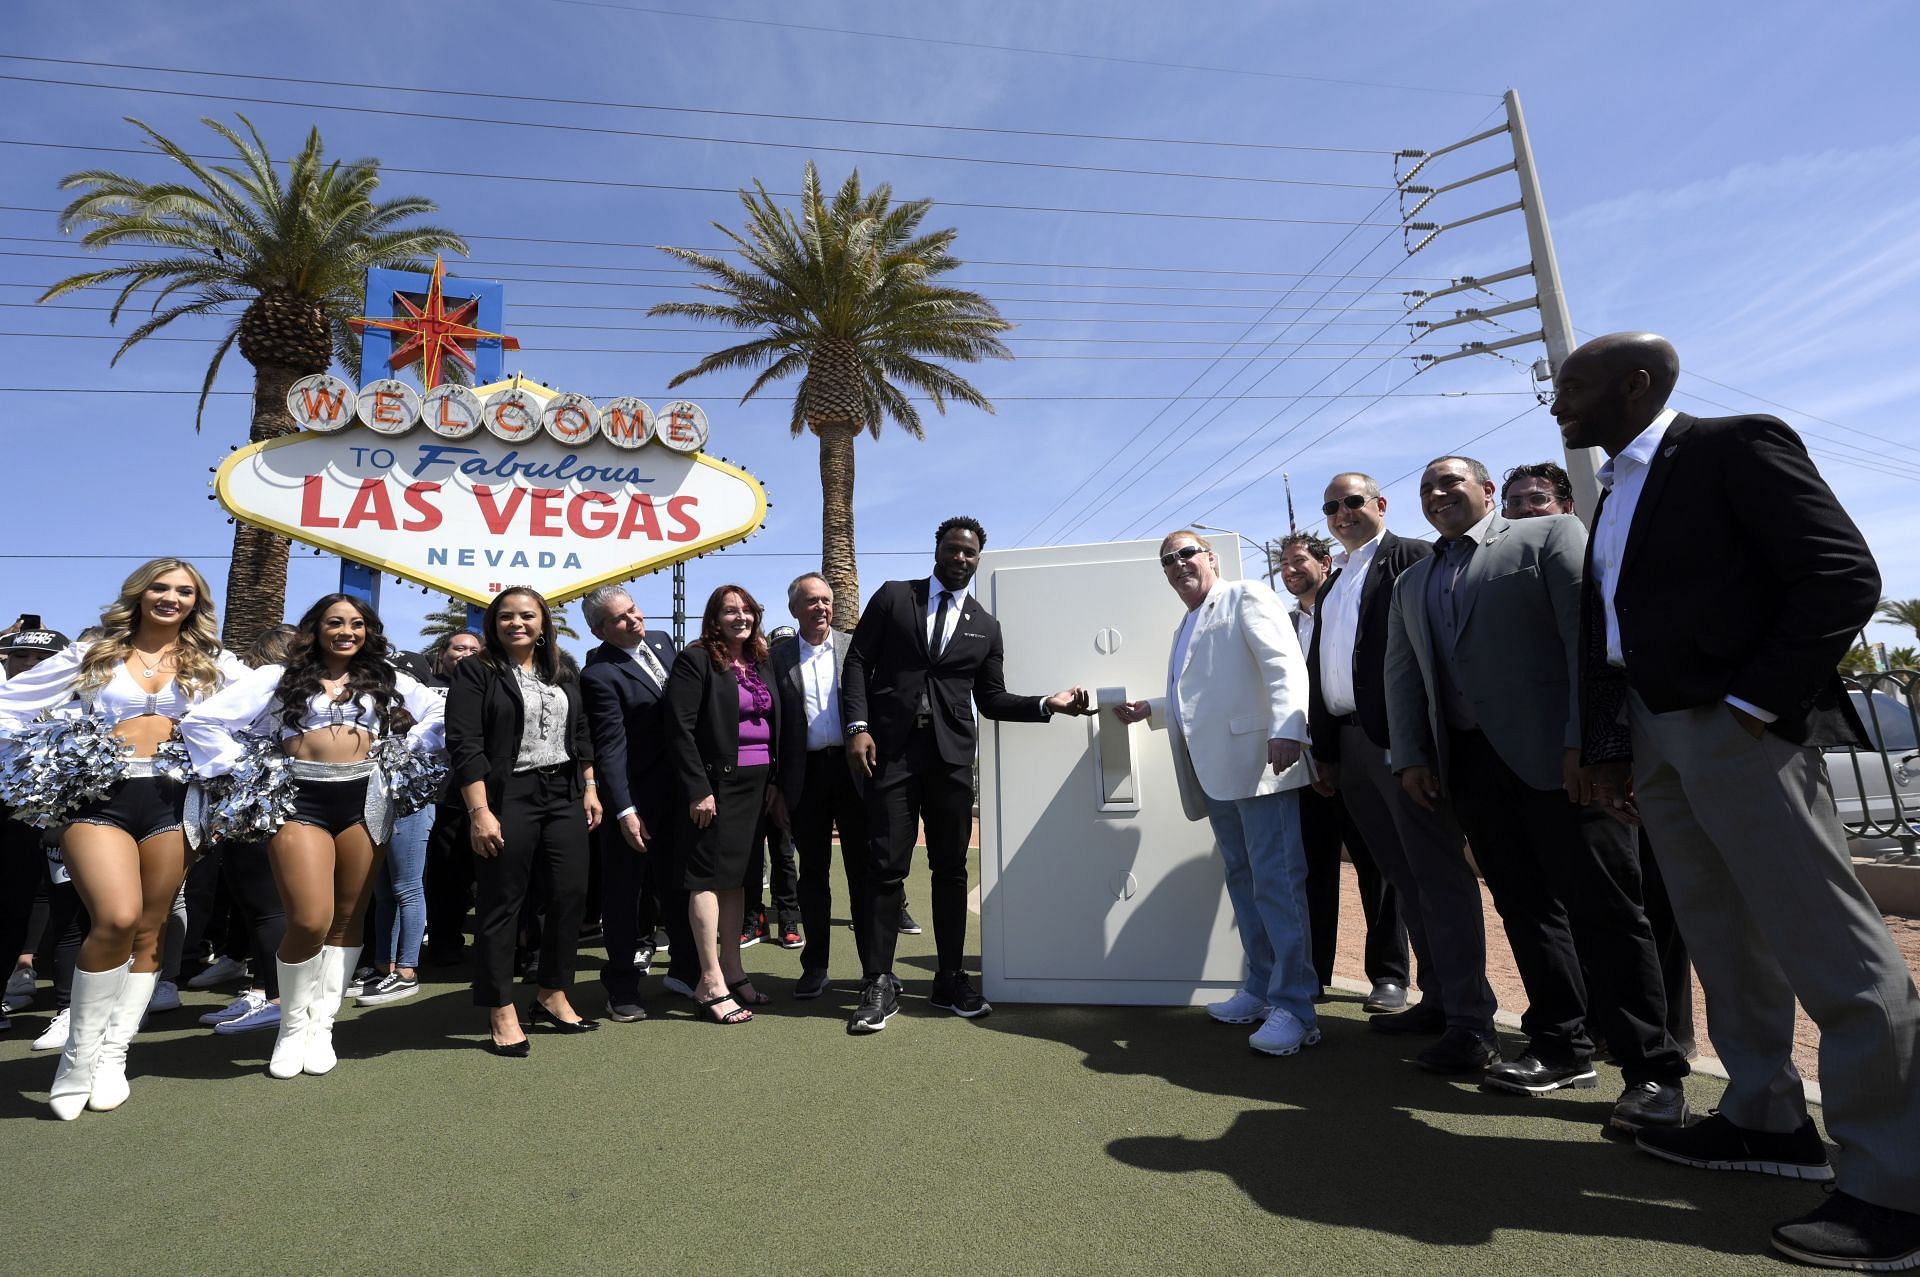 &#039;Welcome to Fabulous Las Vegas&#039; Sign Turns Silver And Black Ahead of 2022 NFL Draft